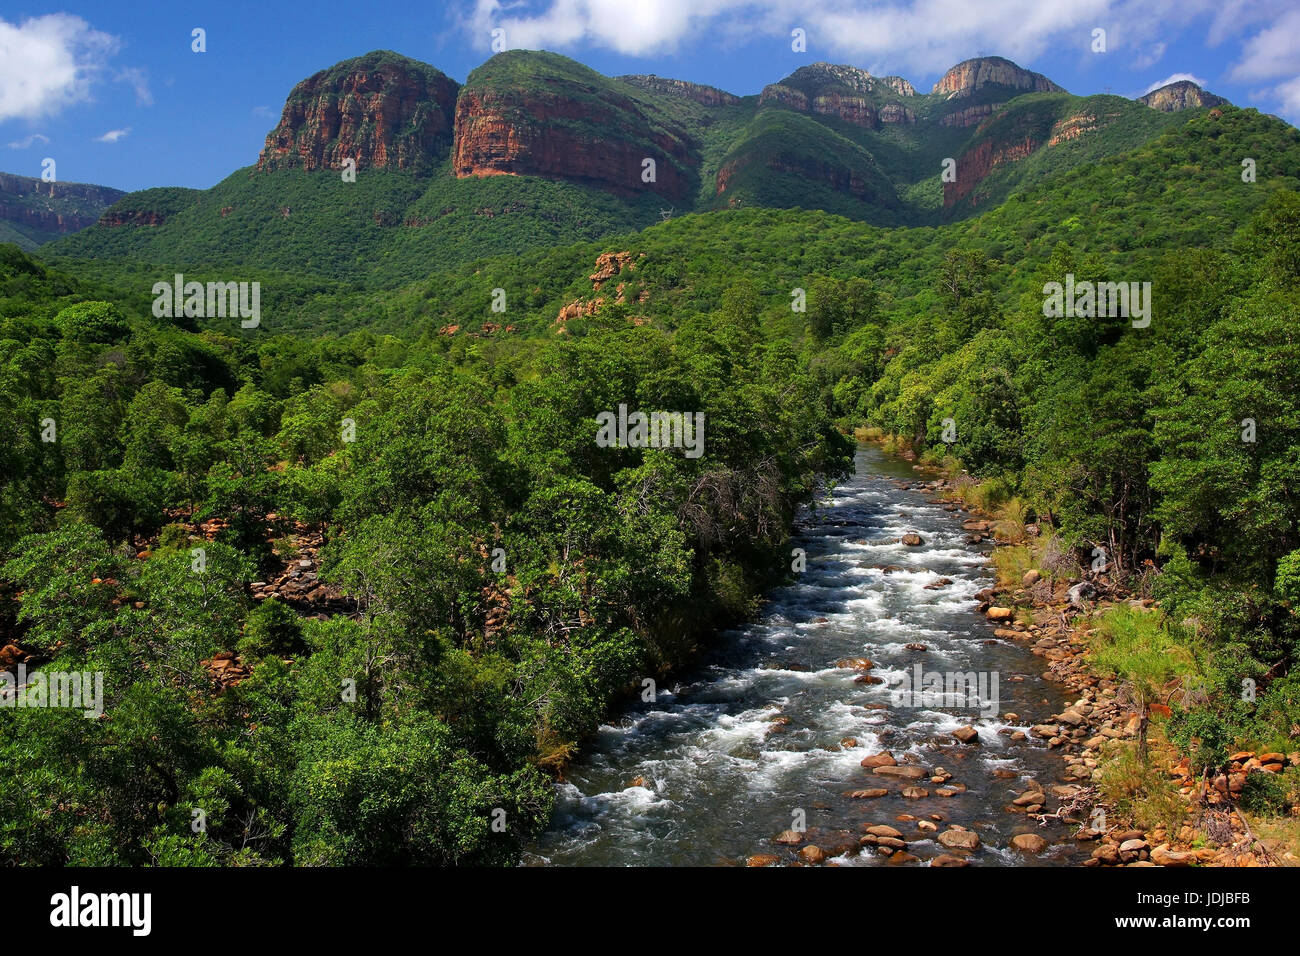 Sud Africa, Blyde River Canyon, Suedafrika, Blyde River Canyon Foto Stock